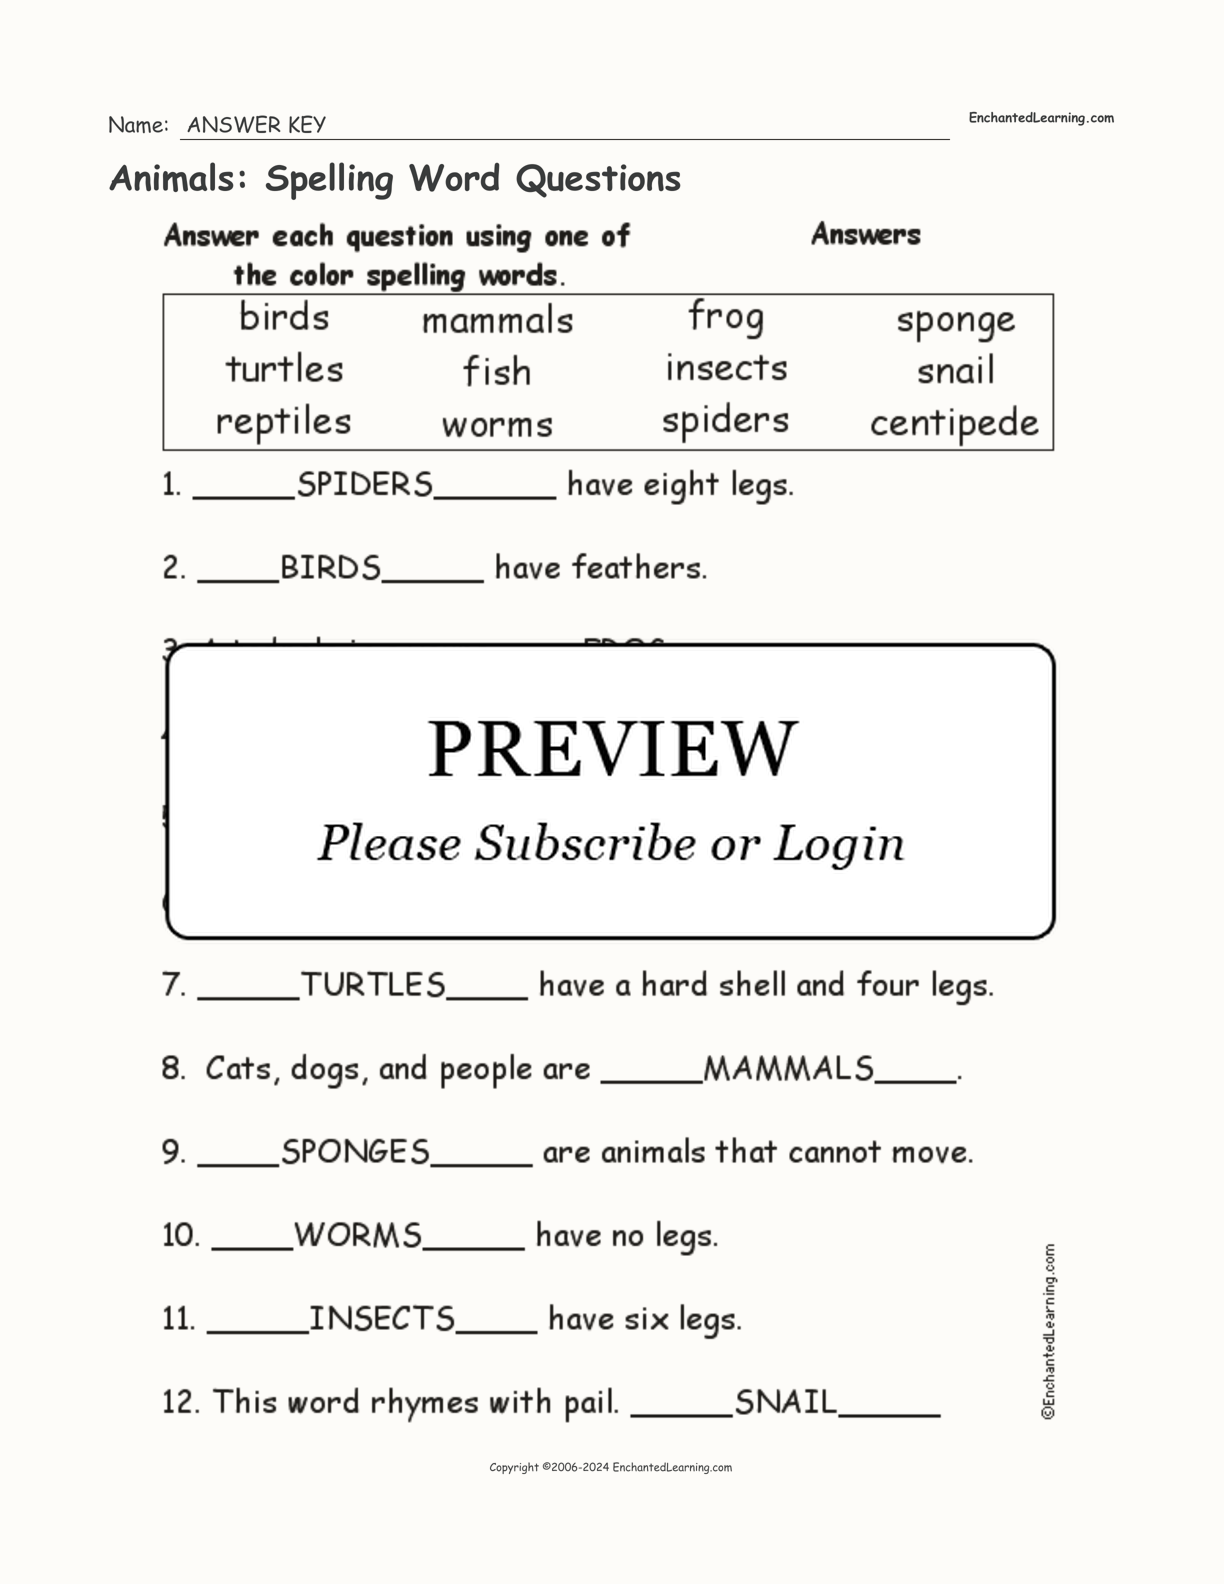 Animals: Spelling Word Questions interactive worksheet page 2